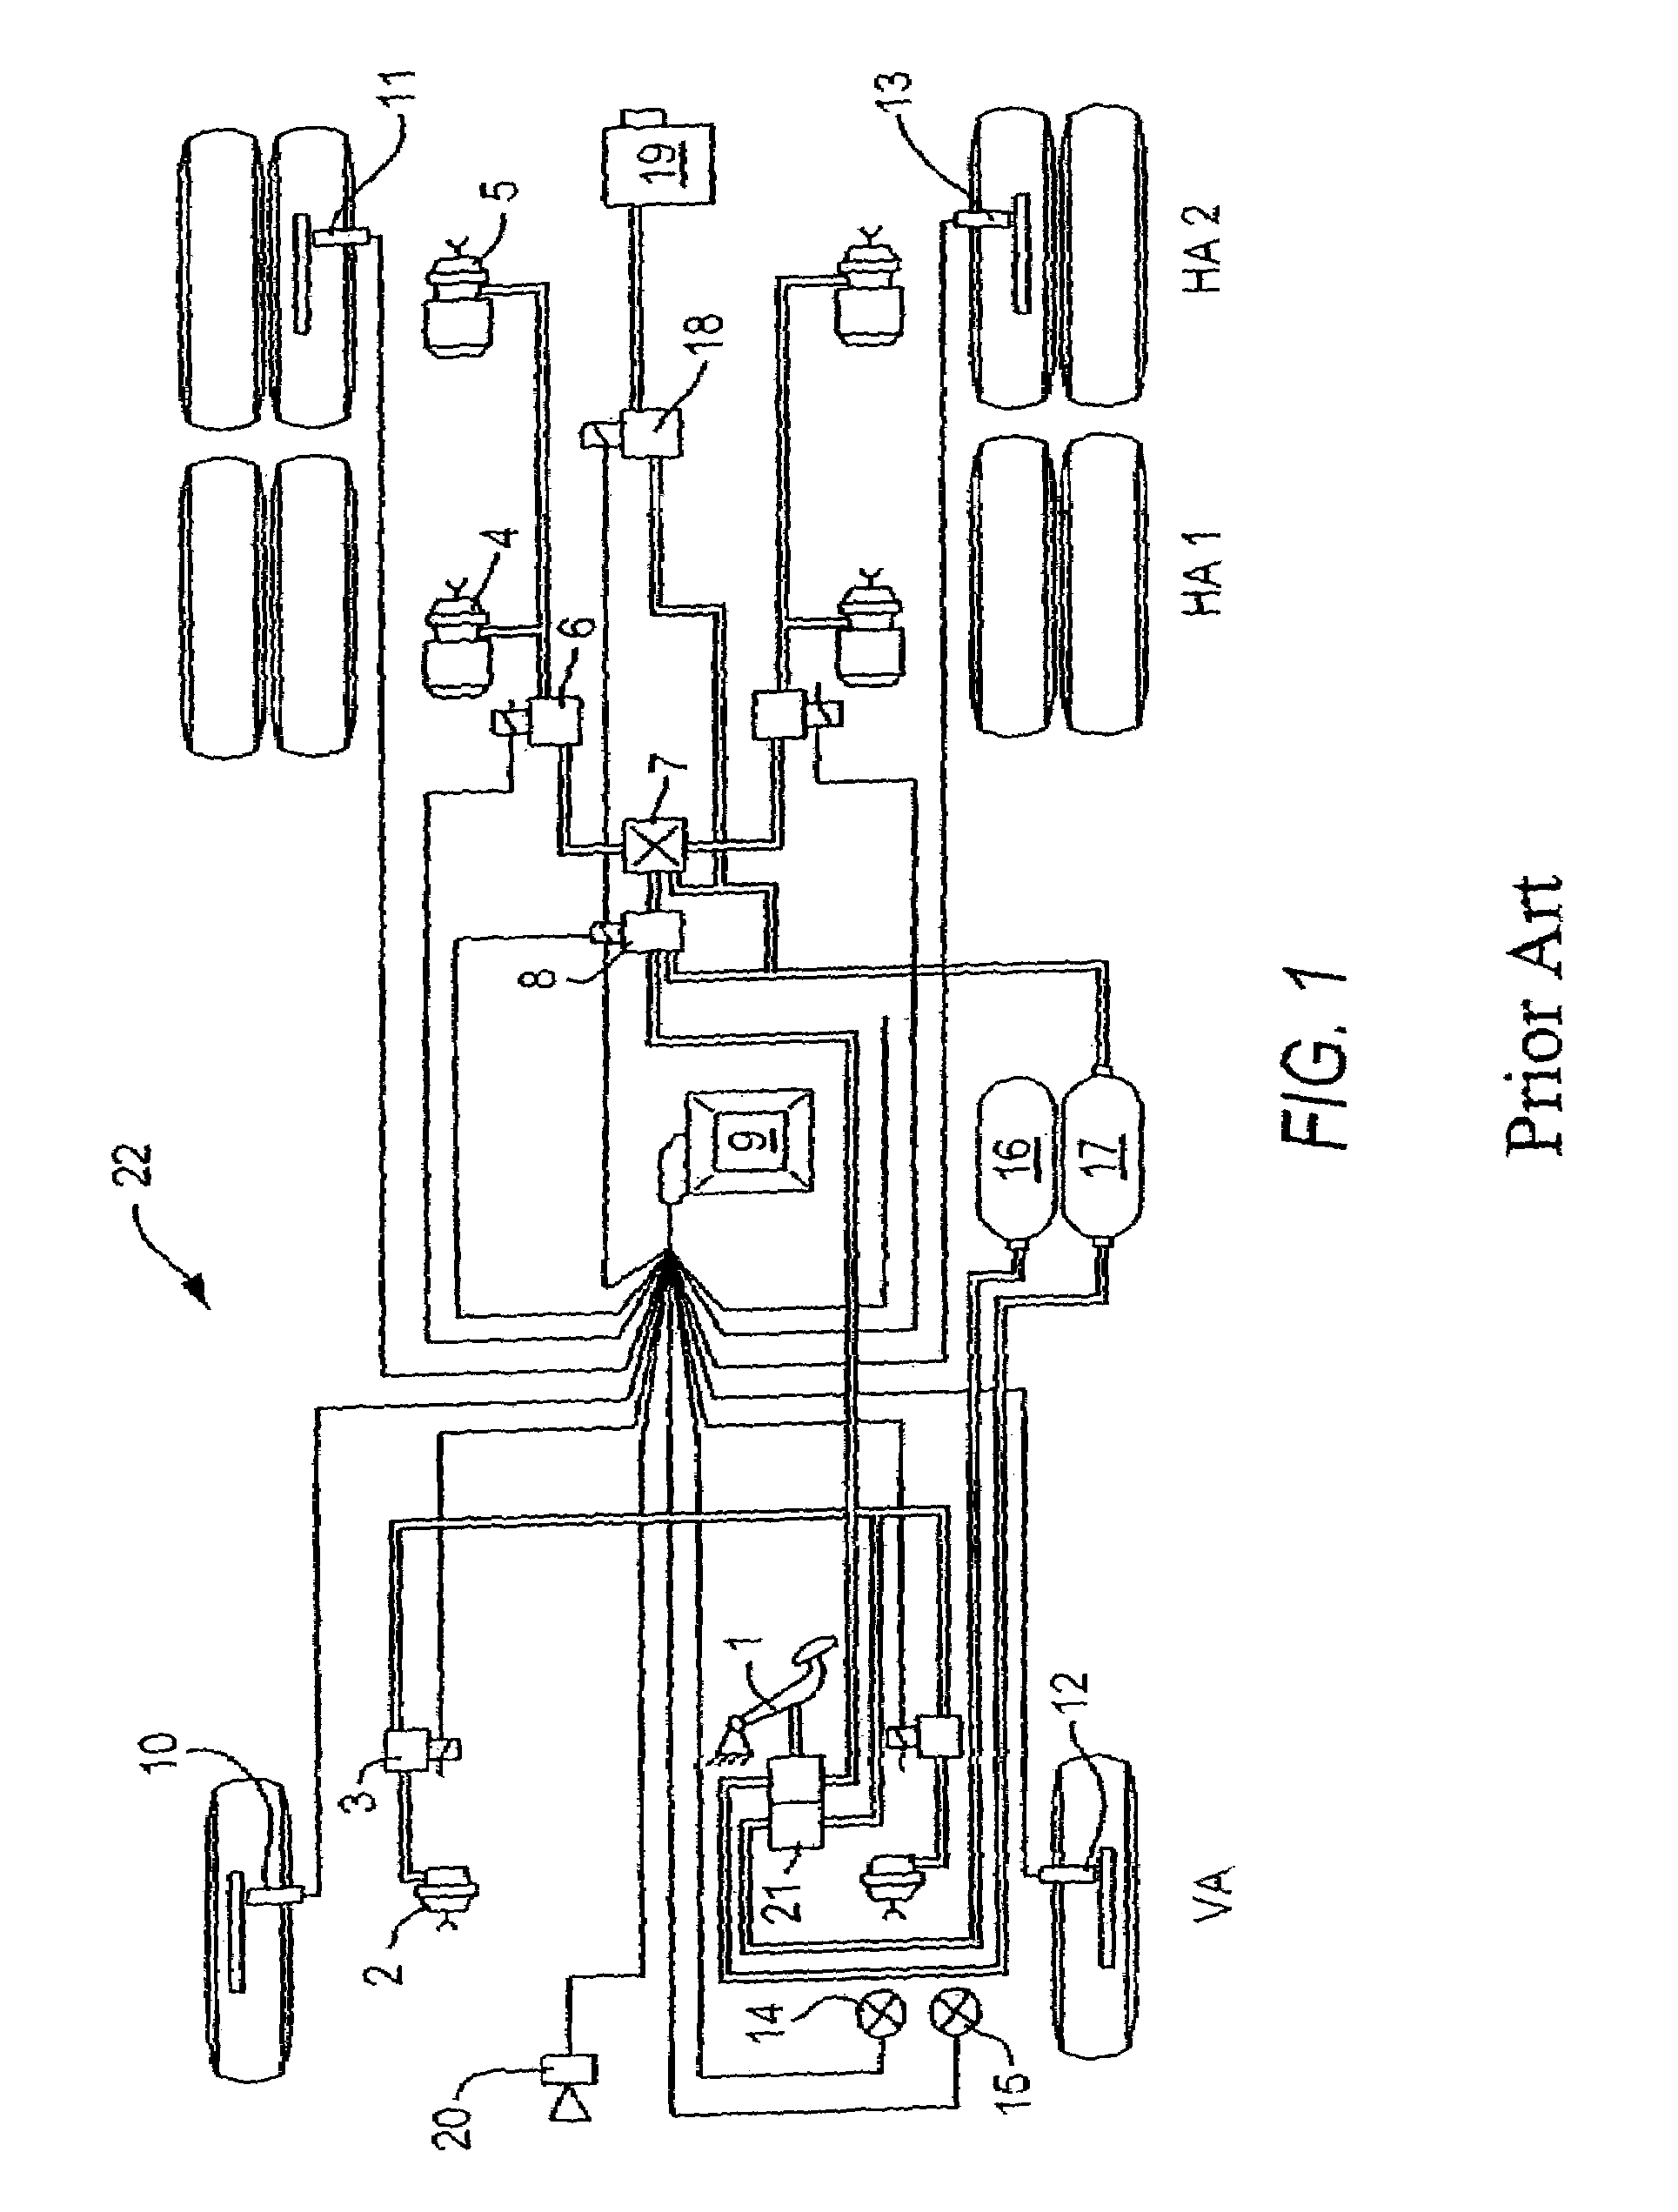 Vehicle automatic distance control system and method